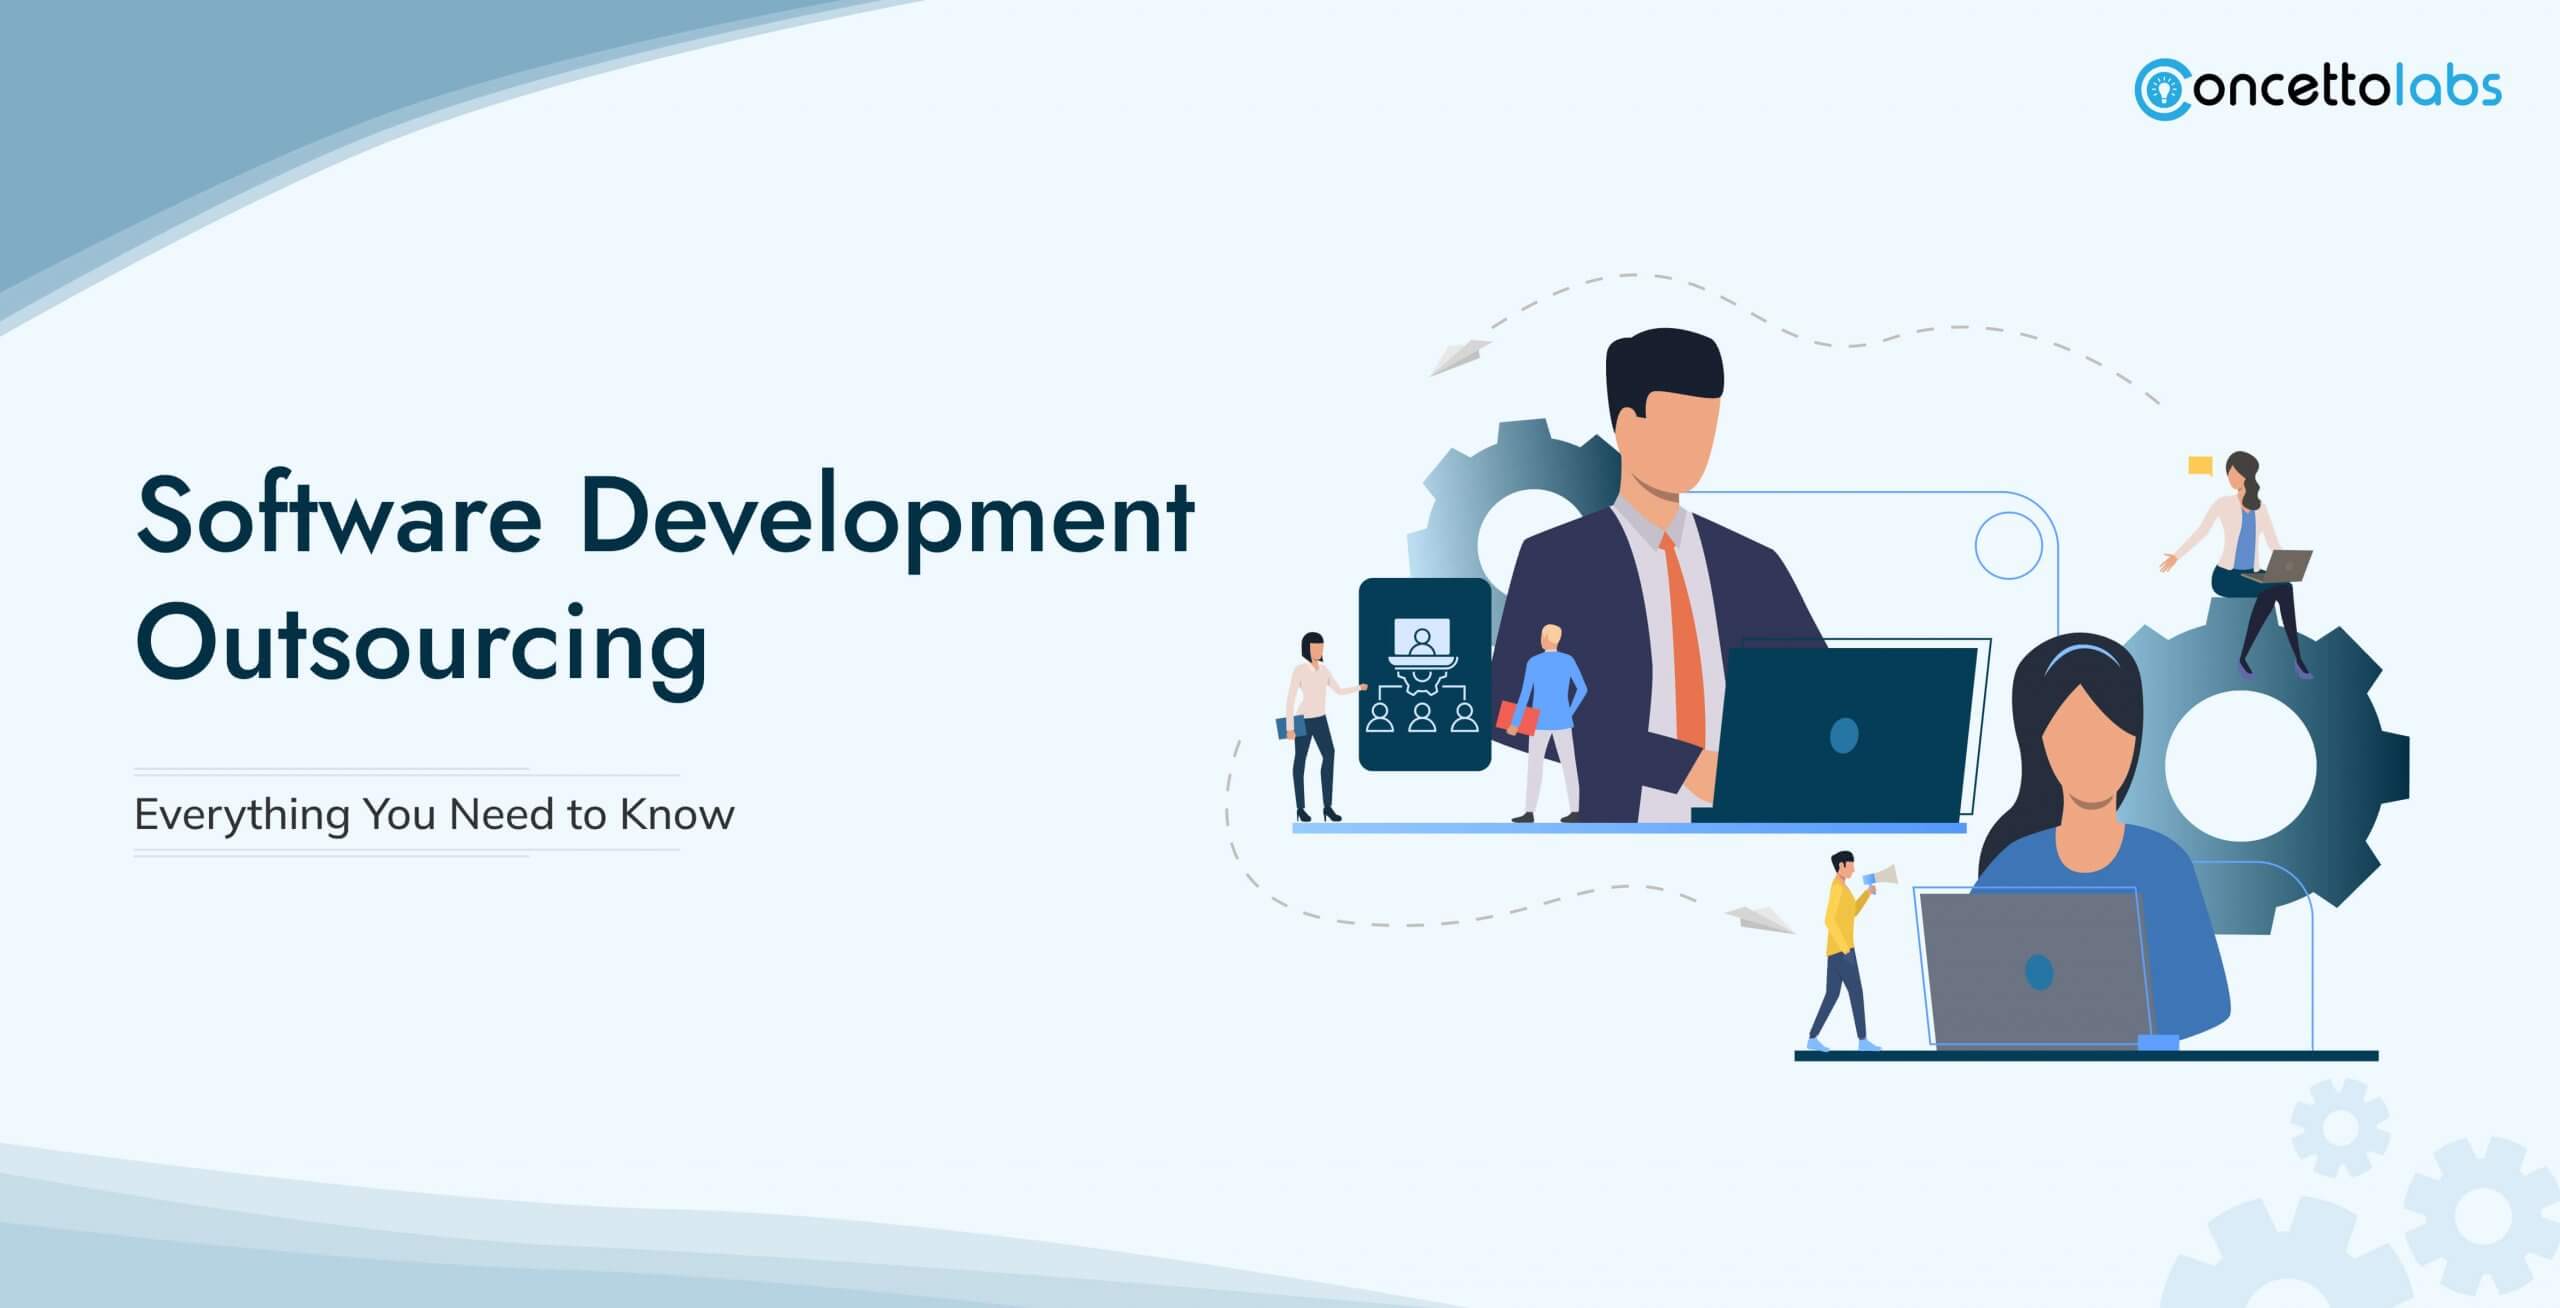 Software Development Outsourcing: Everything You Need to Know